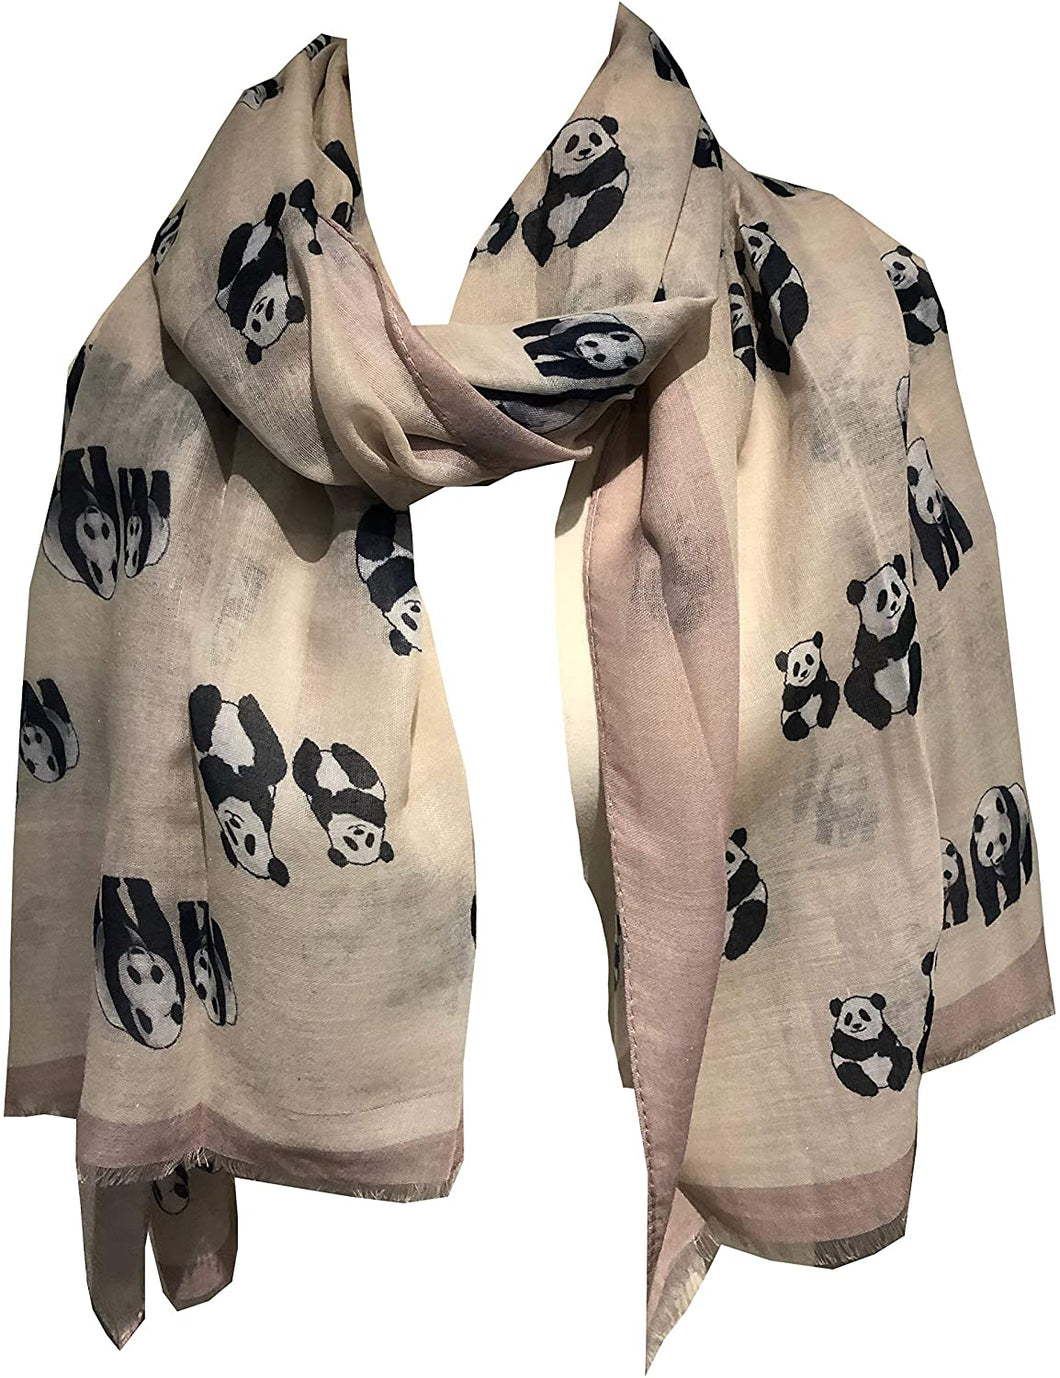 Panda ladies long scarf/wrap. Great for presents/gifts